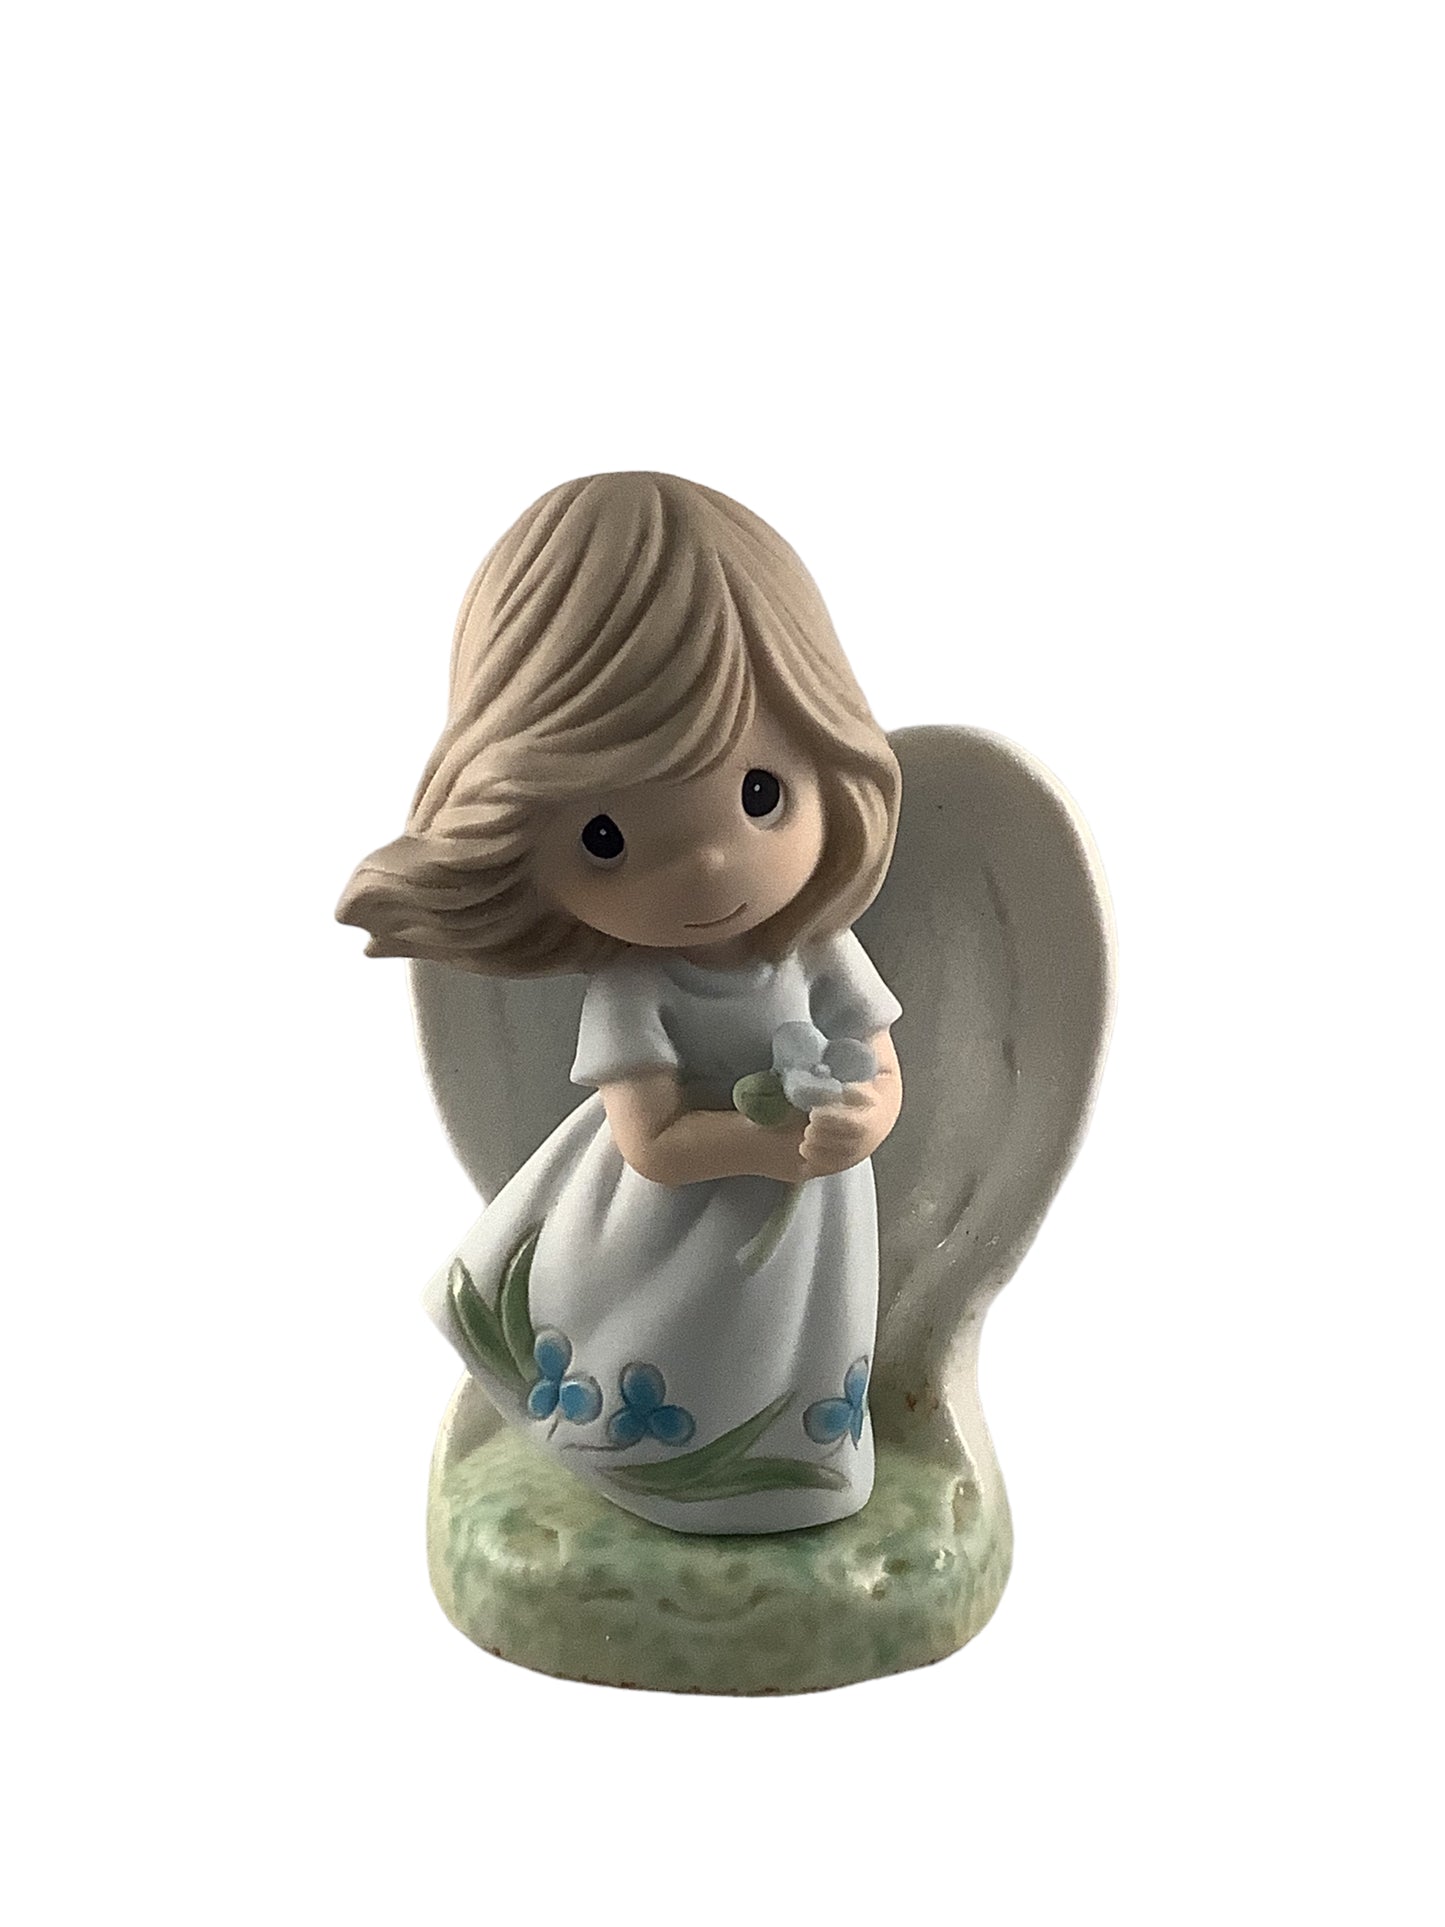 Your Comfort Speaks Directly To My Heart - Precious Moment Figurine